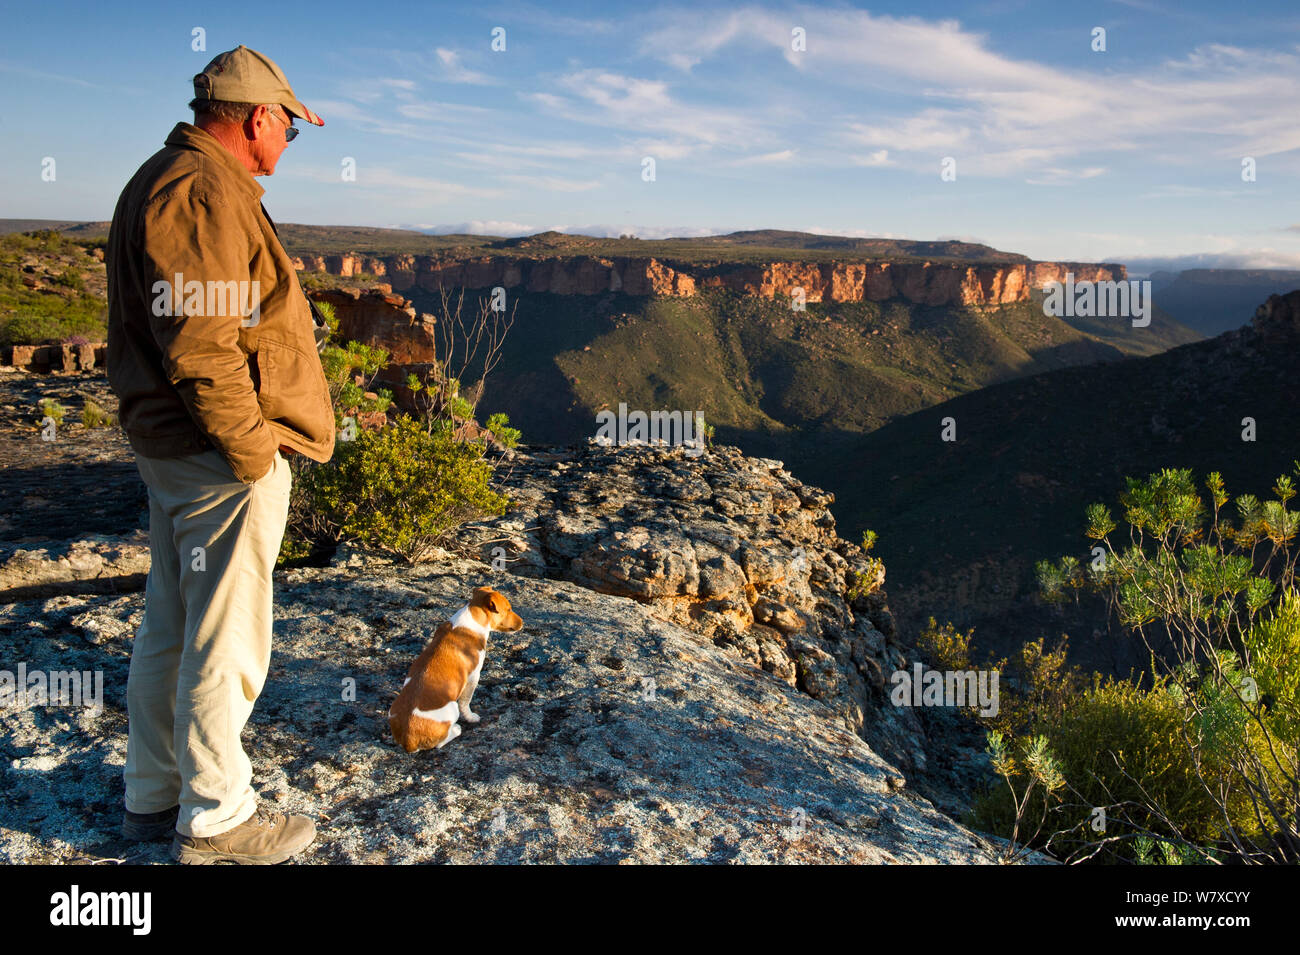 Farmer Willem van Wyk and his dog, looking out over Oorlogskloof canyon. Deep within the gorge is one of two known breeding sites for the Endangered Clanwilliam sandfish (Labeo seeberi). Papkuilsfontein farm, Northern Cape, South Africa. August 2013. Stock Photo